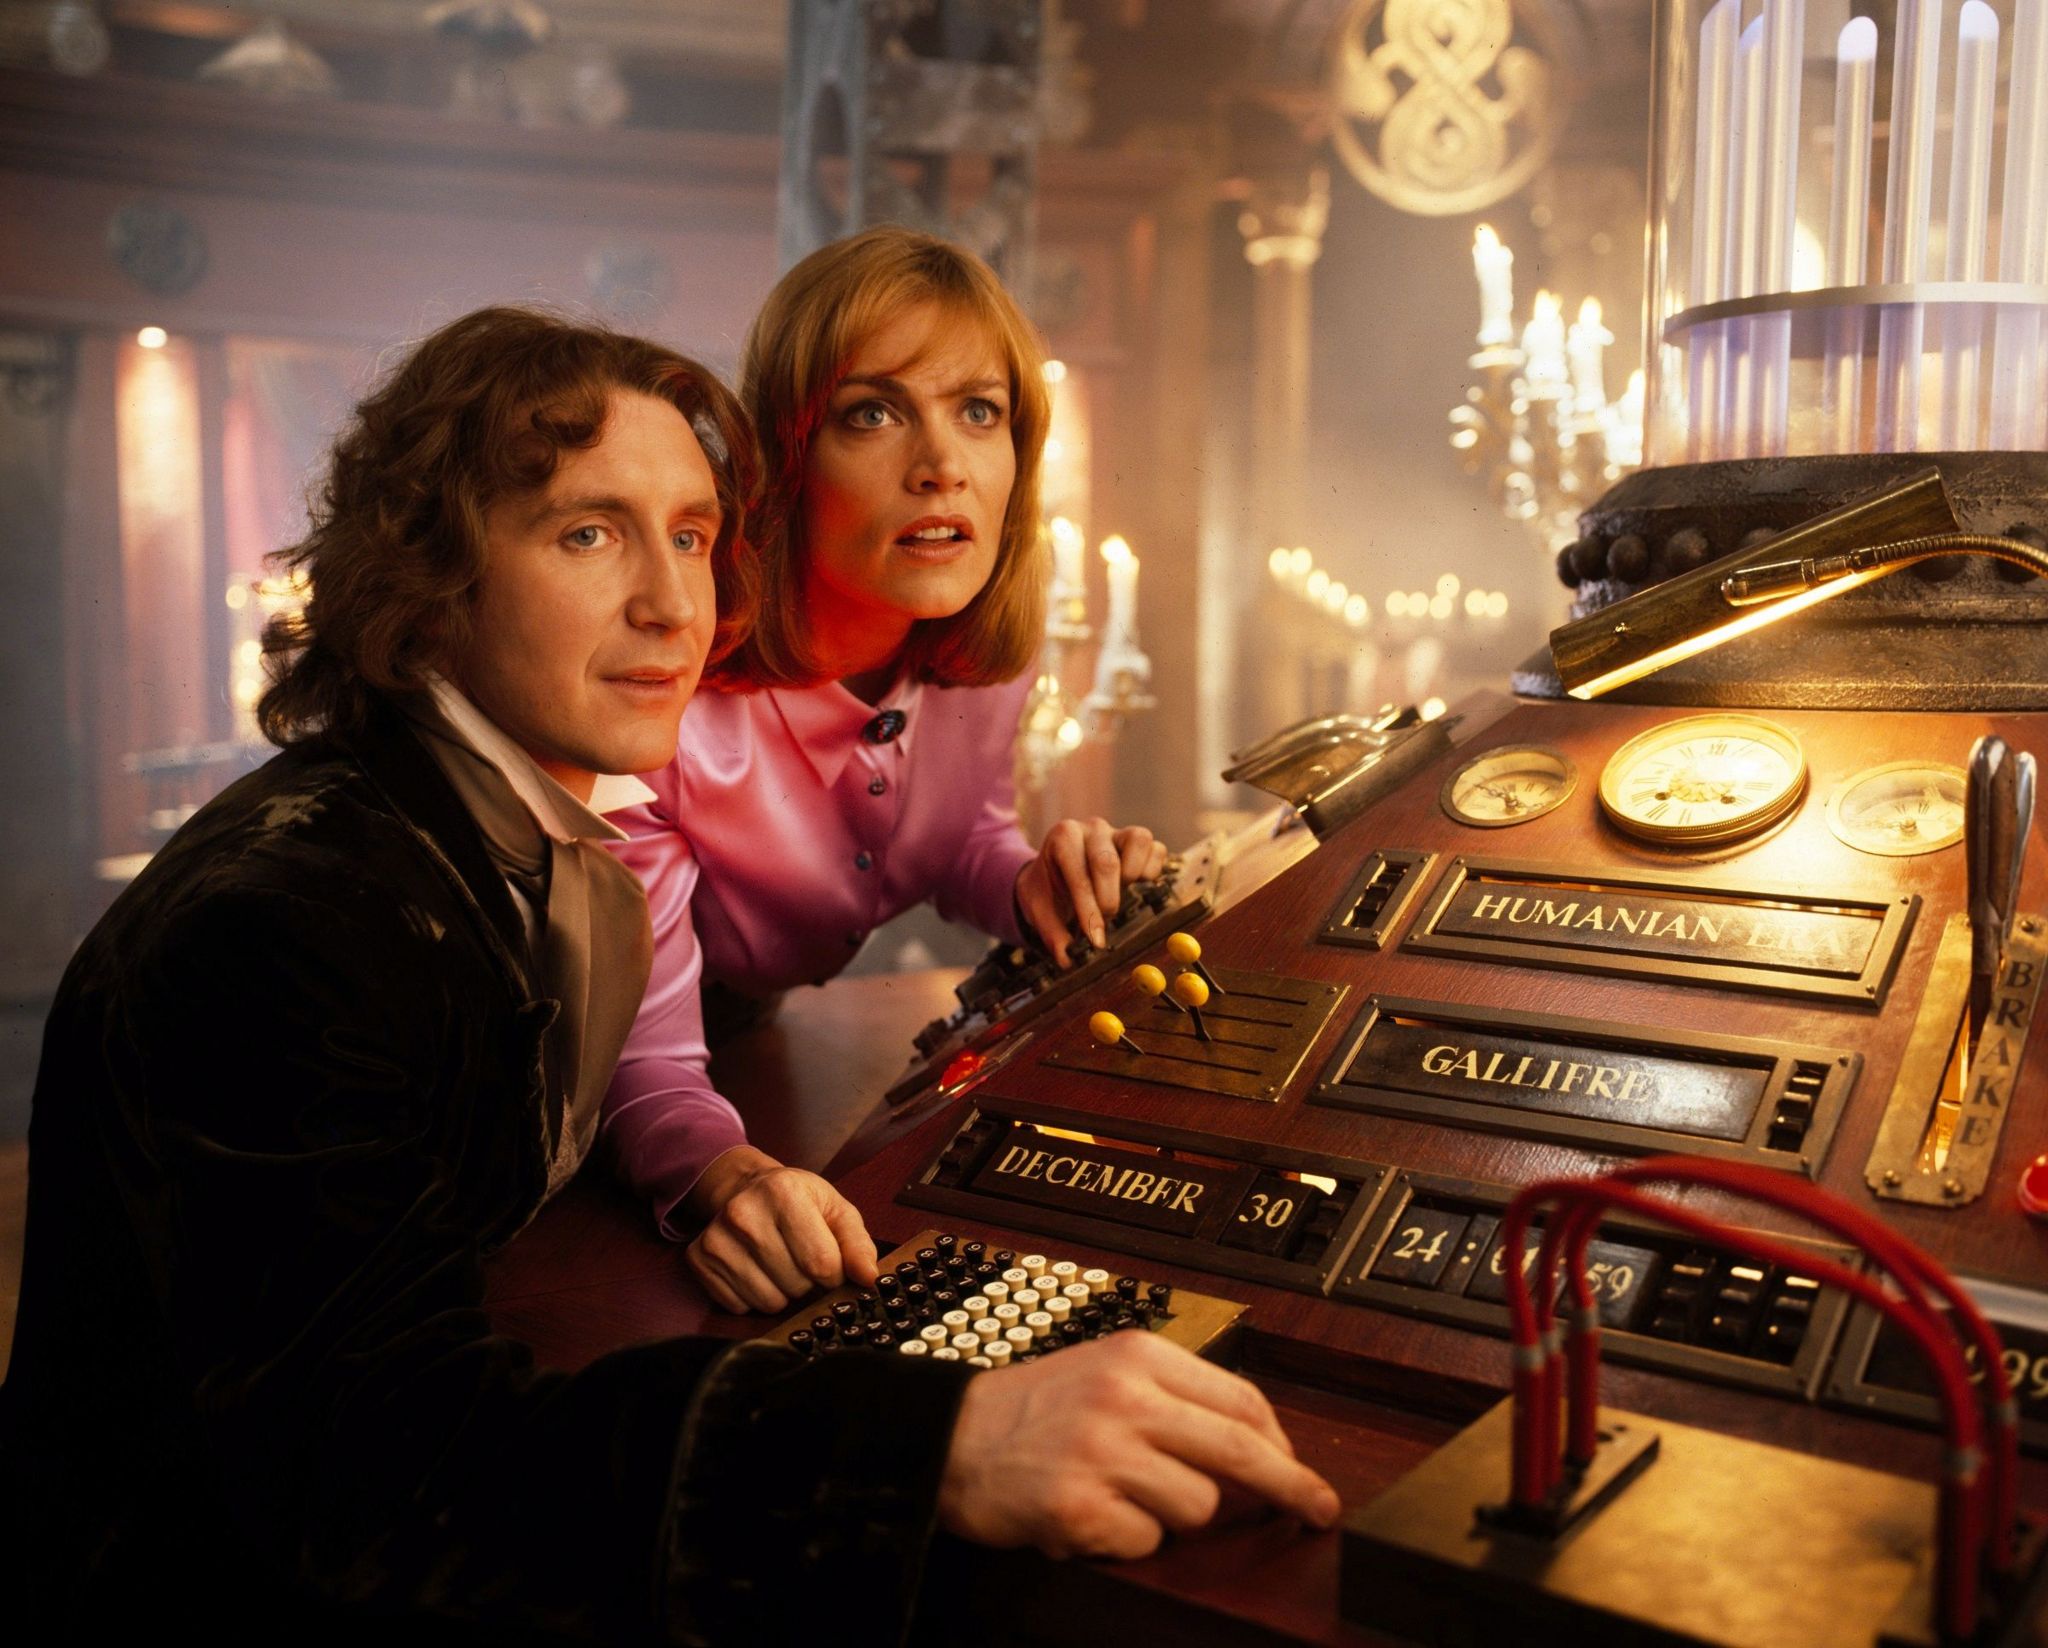 Paul McGann (The Doctor) and Daphne Ashbrook (Dr Grace Holloway) aboard the TARDIS in Doctor Who: The Movie (1996)